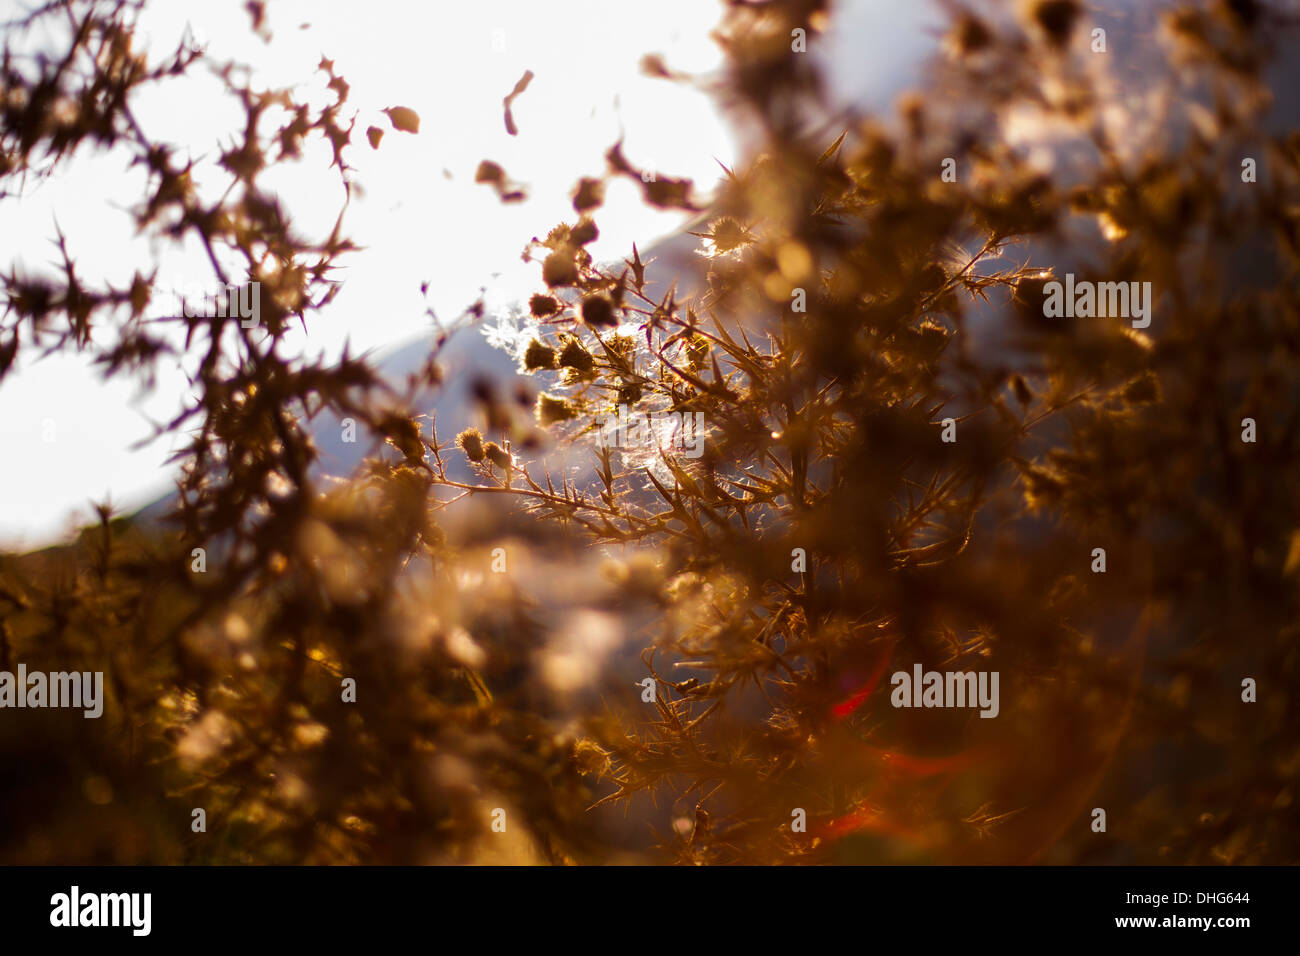 Close up photo of dry flowers in autumn with sun glare. Stock Photo